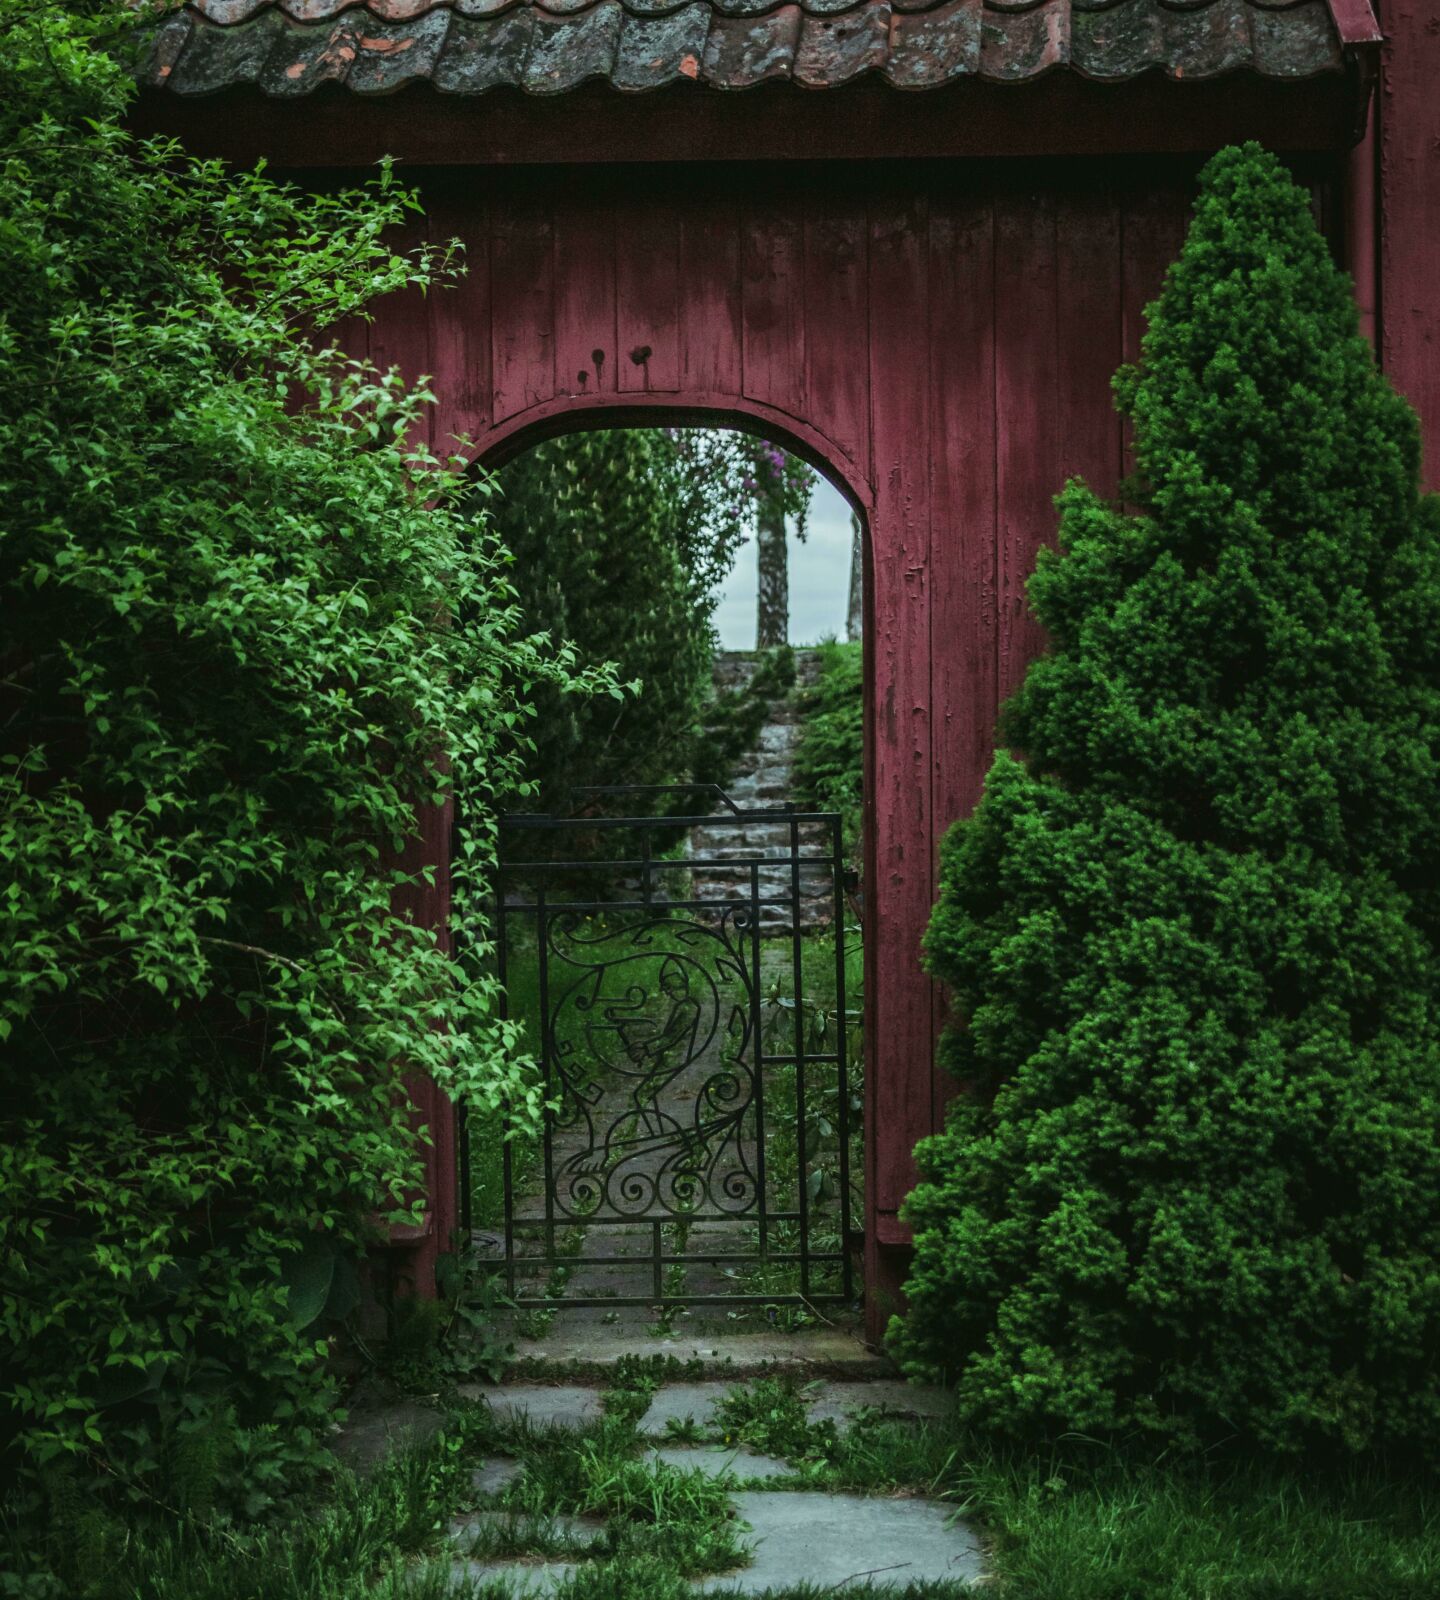 Garden gate with a stone path leading up to it and that is surrounded by vegetation.